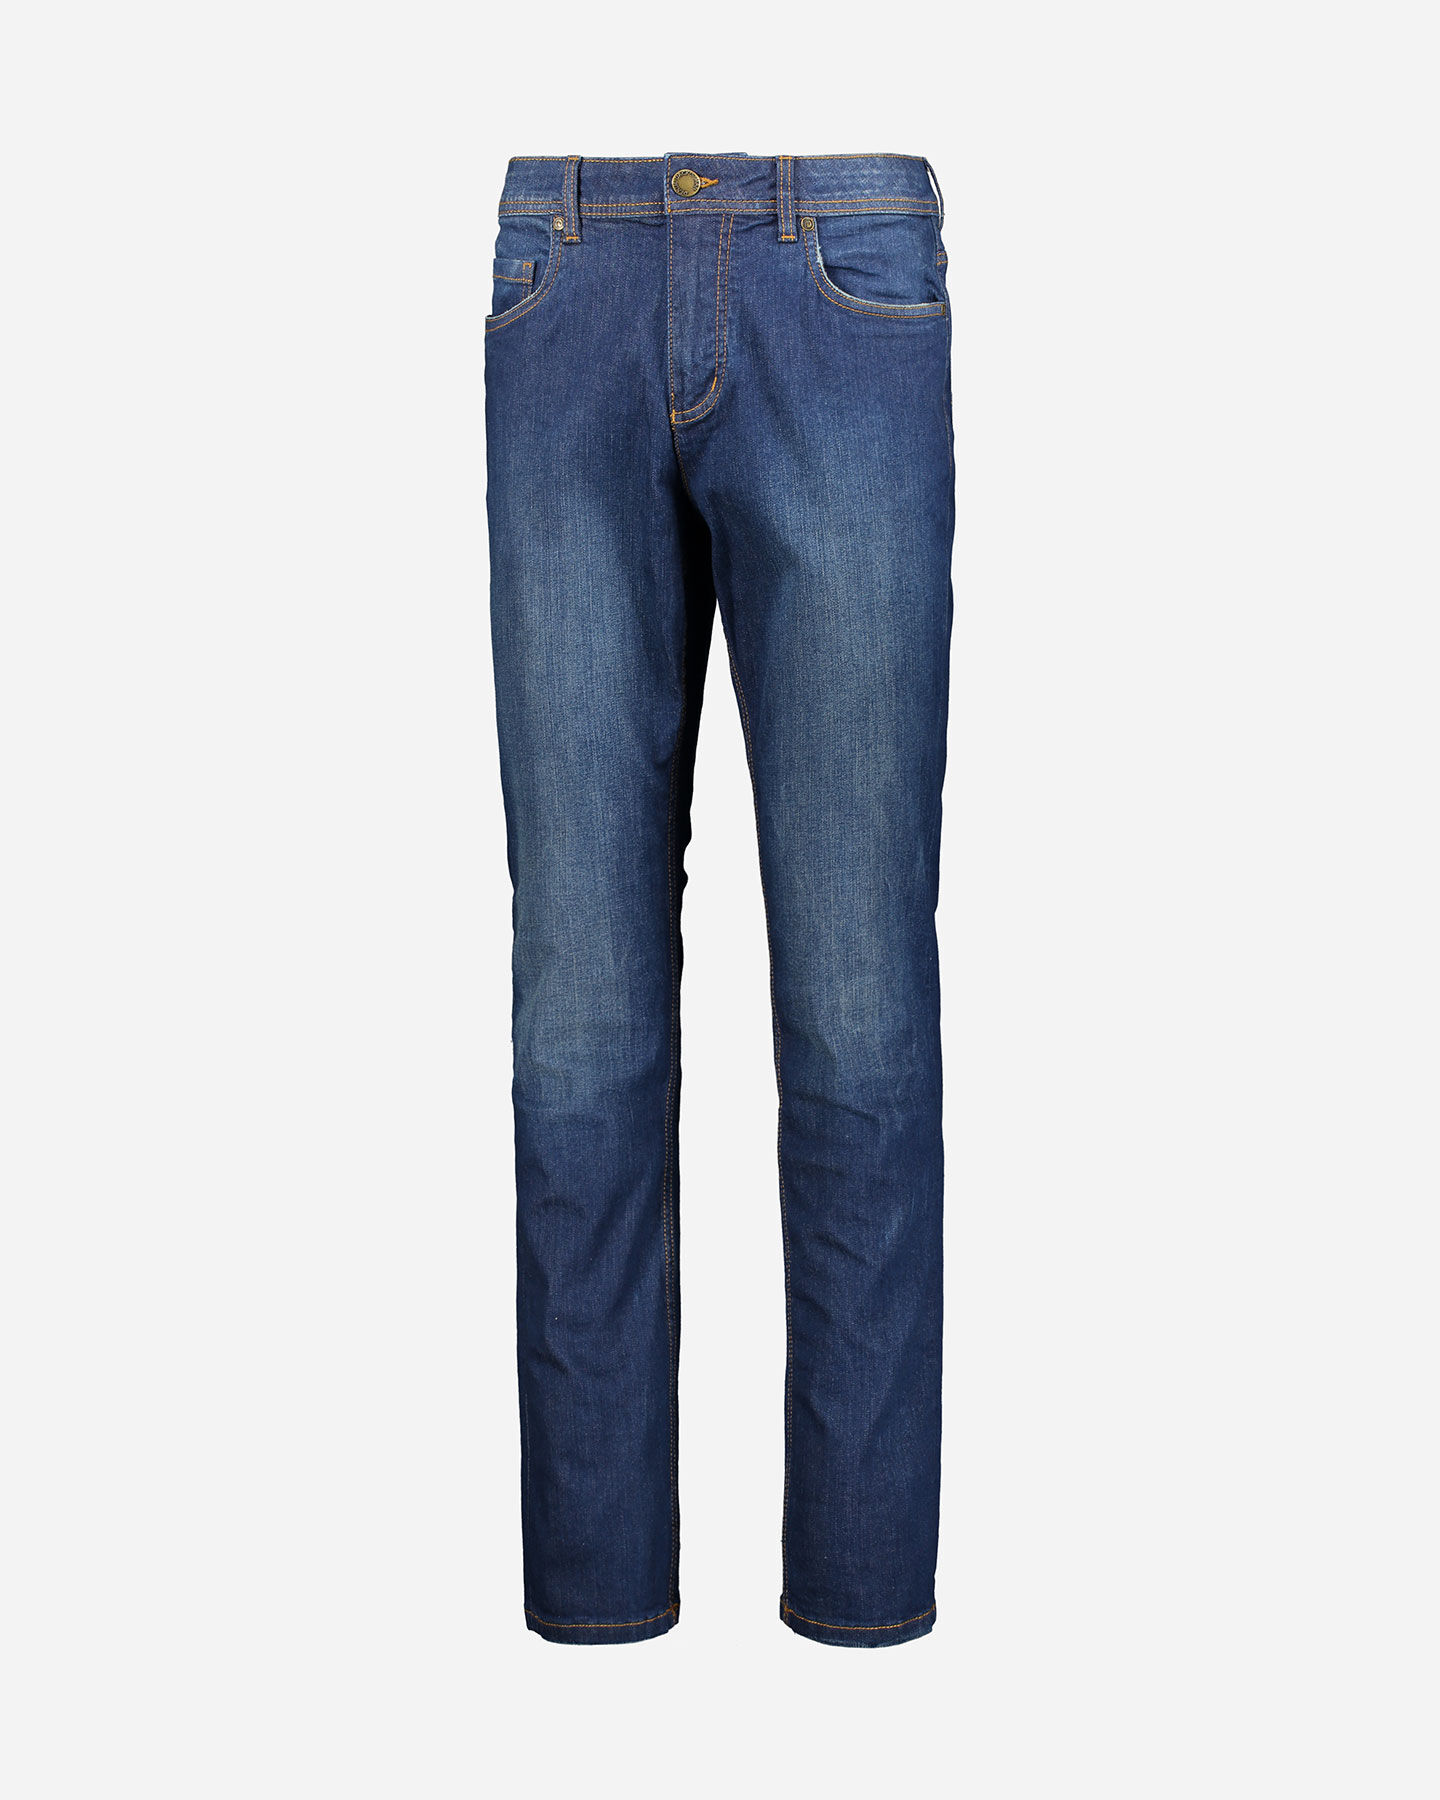  Jeans DACK'S REGULAR M S4074141|DD|46 scatto 0